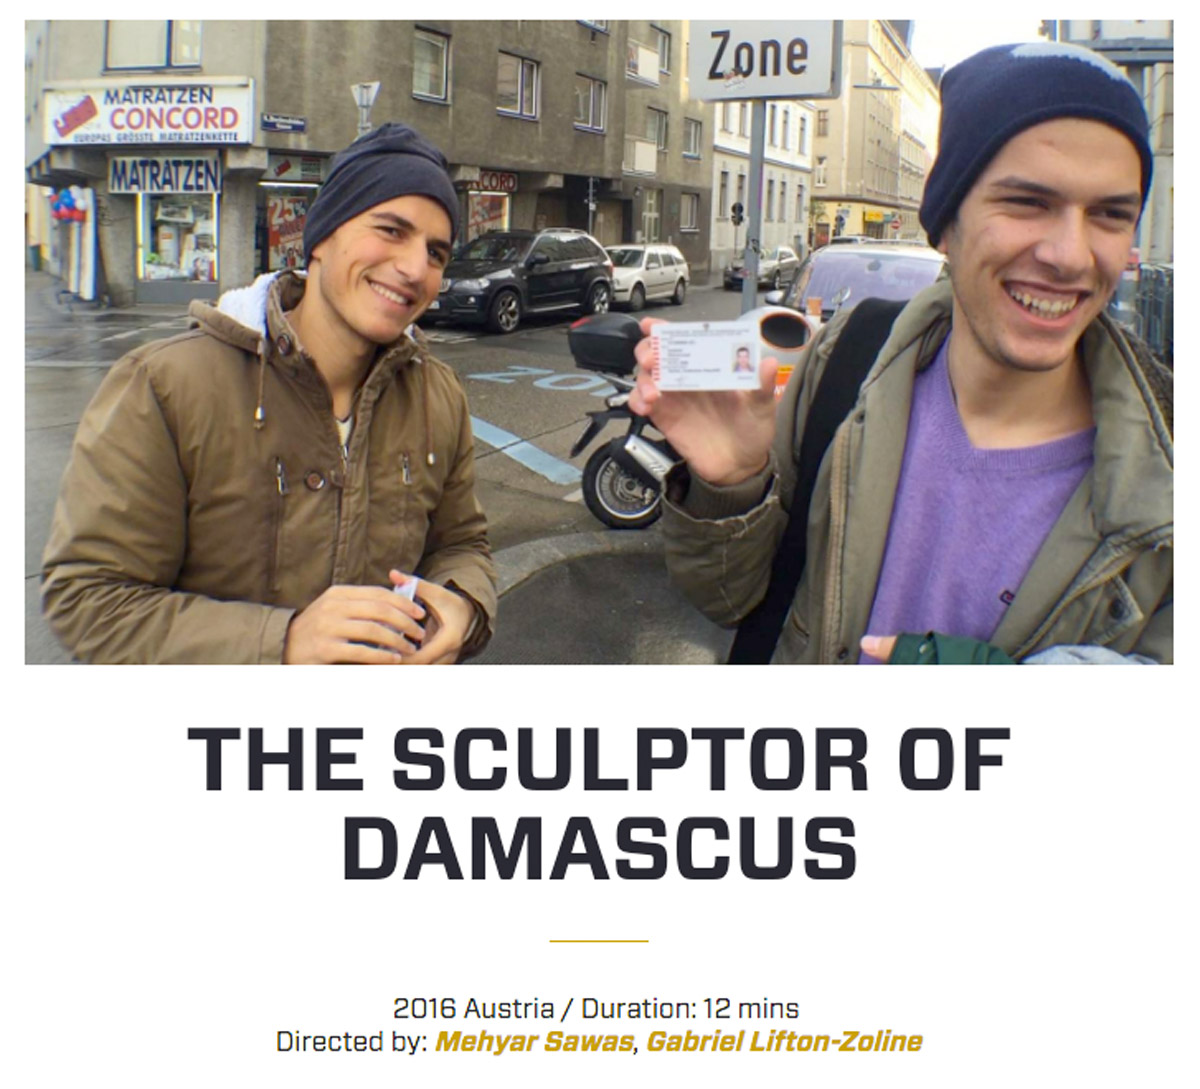 The Sculptor of Damascus [RYOT Films] 2016